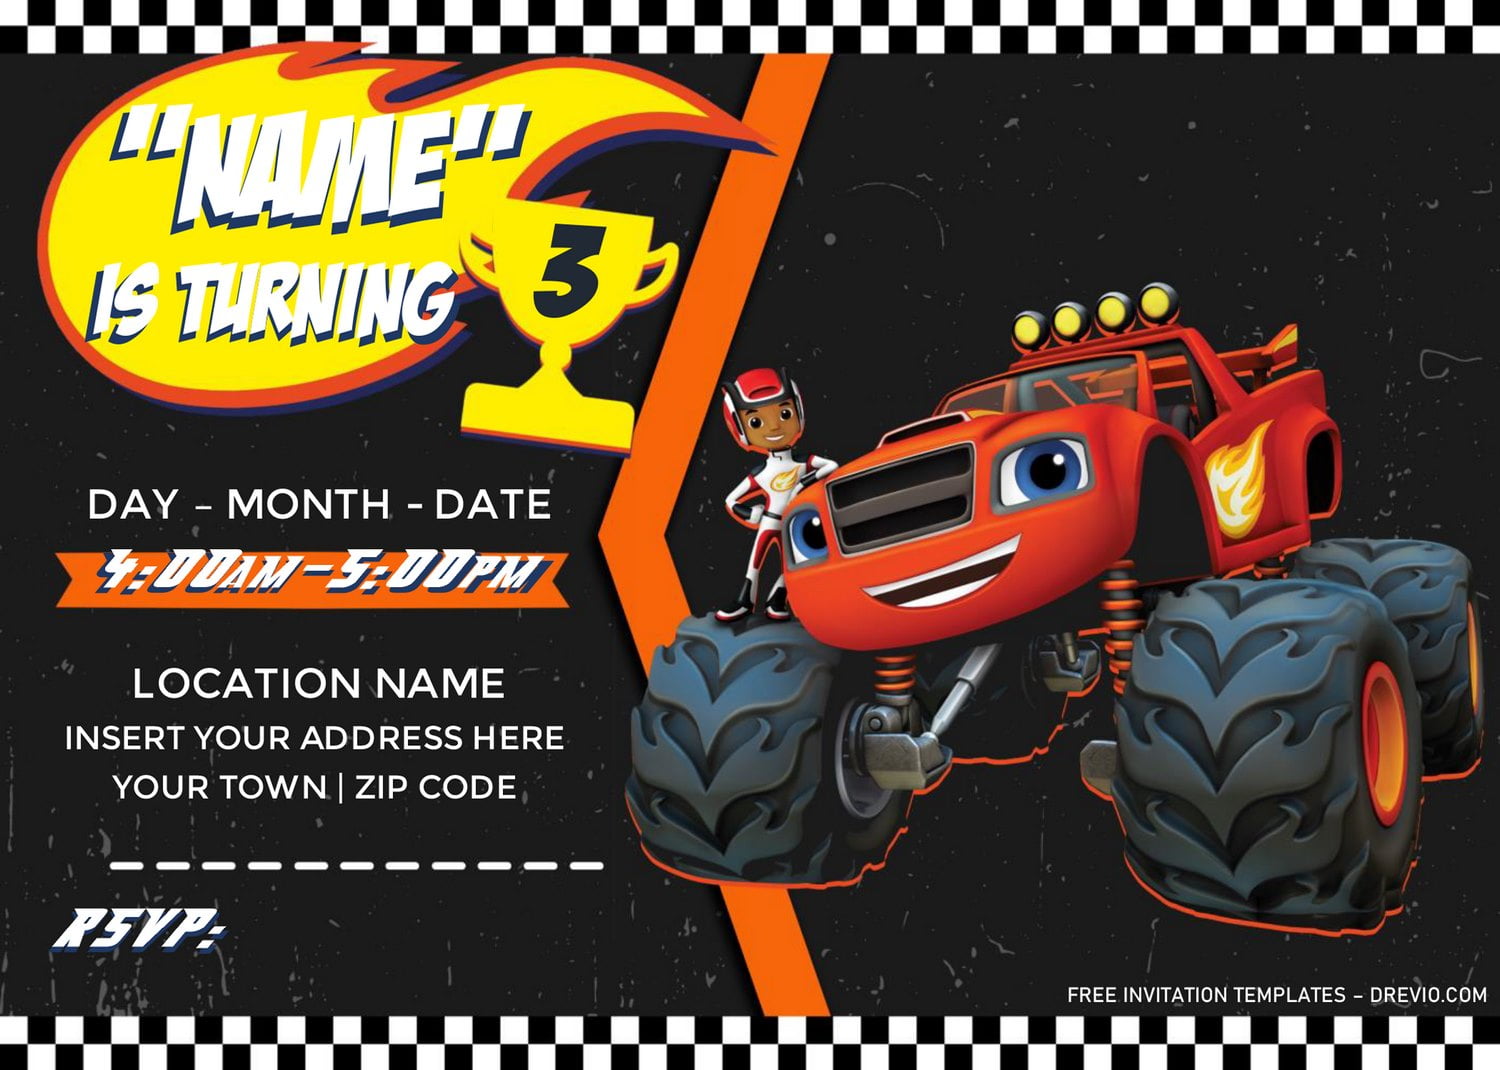 Free Blaze And The Monster Machines Birthday Invitation Templates For Word Download Hundreds Free Printable Birthday Invitation Templates